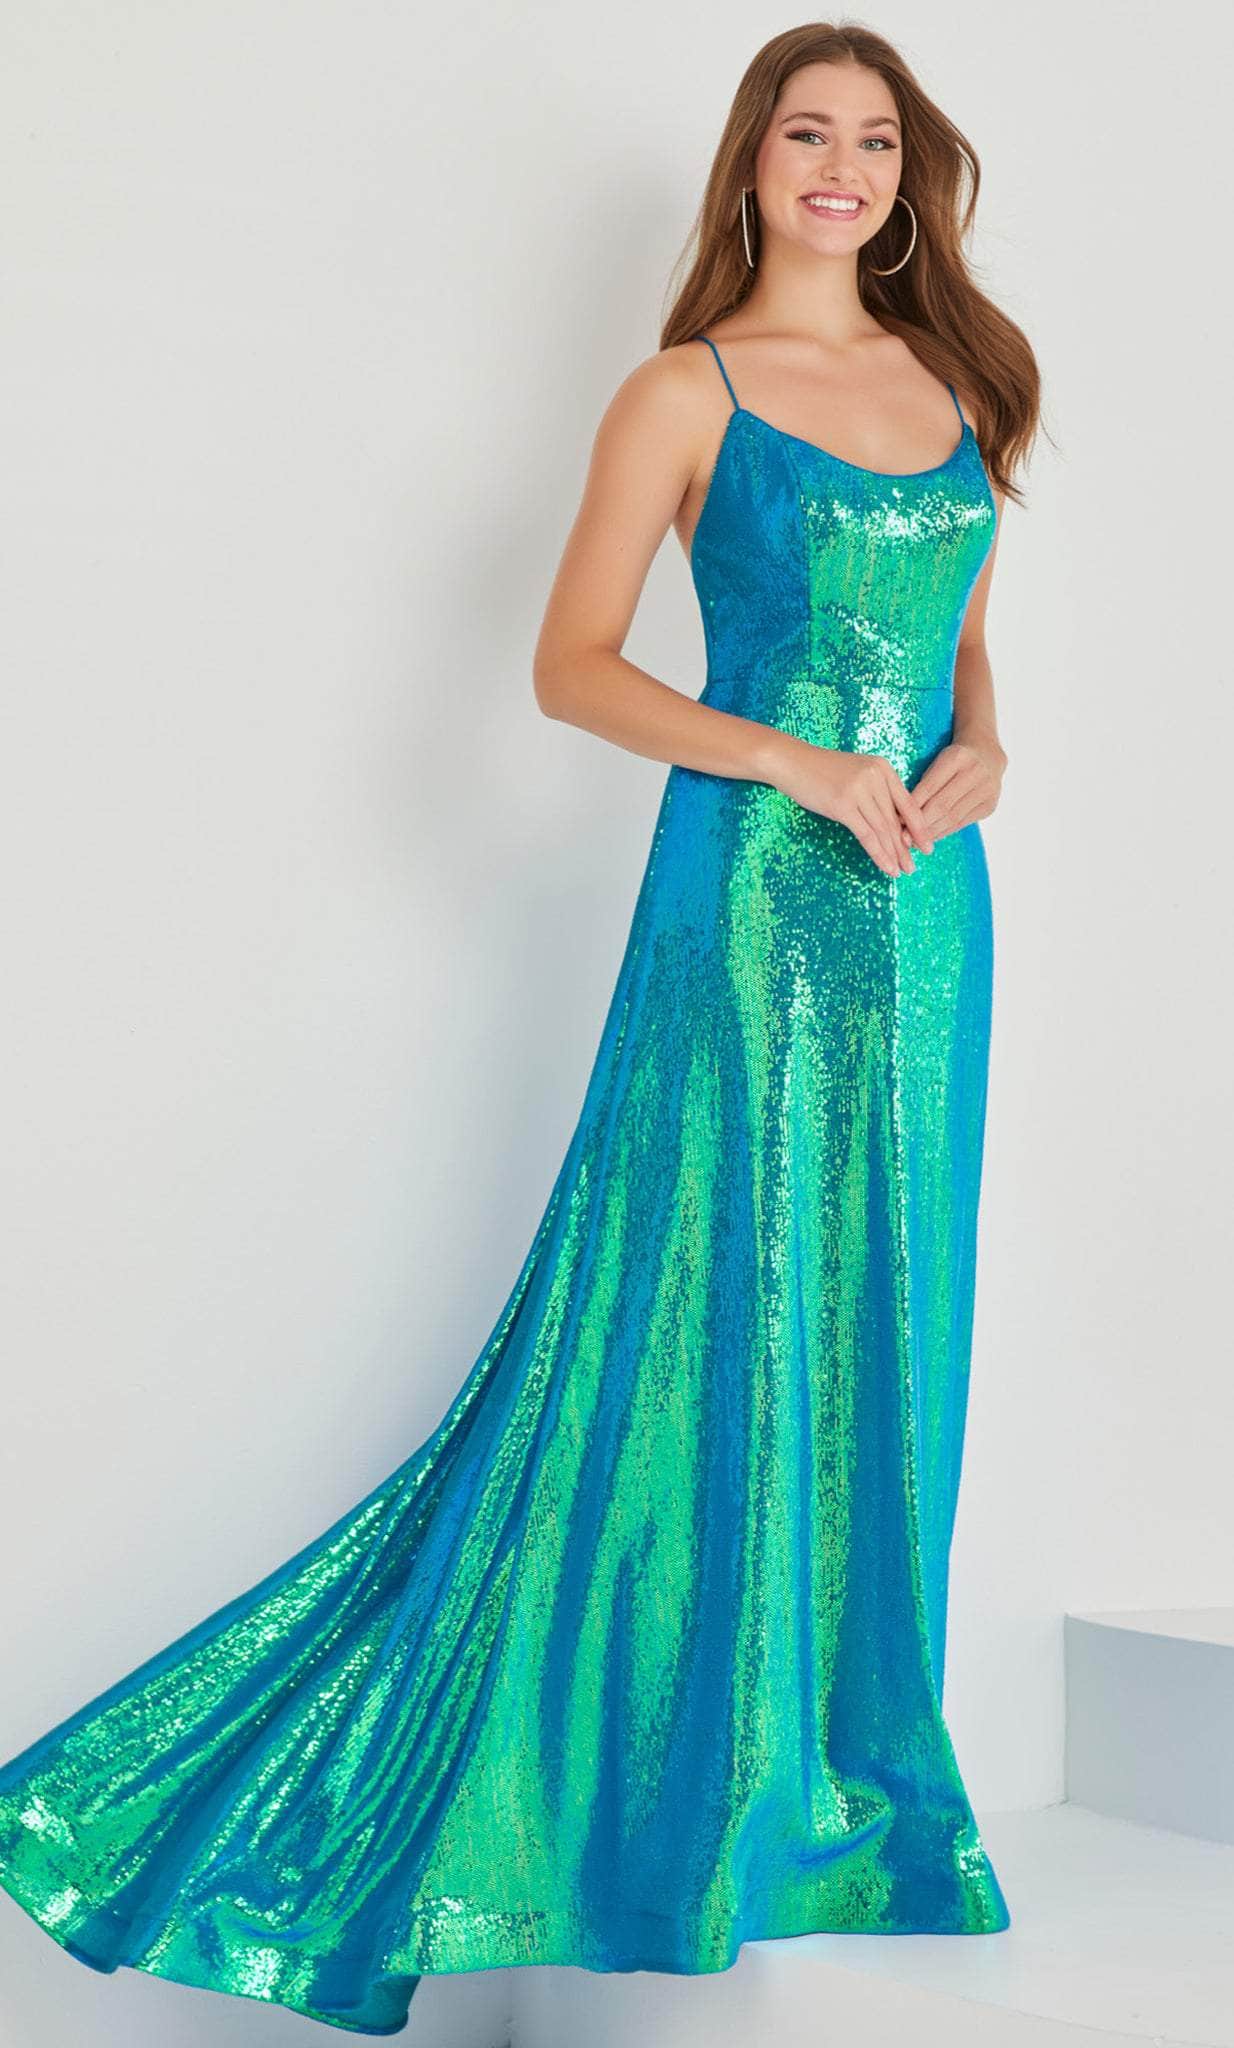 Tiffany Designs by Christina Wu 16030 - Sequined Scoop-Neck Prom Gown
